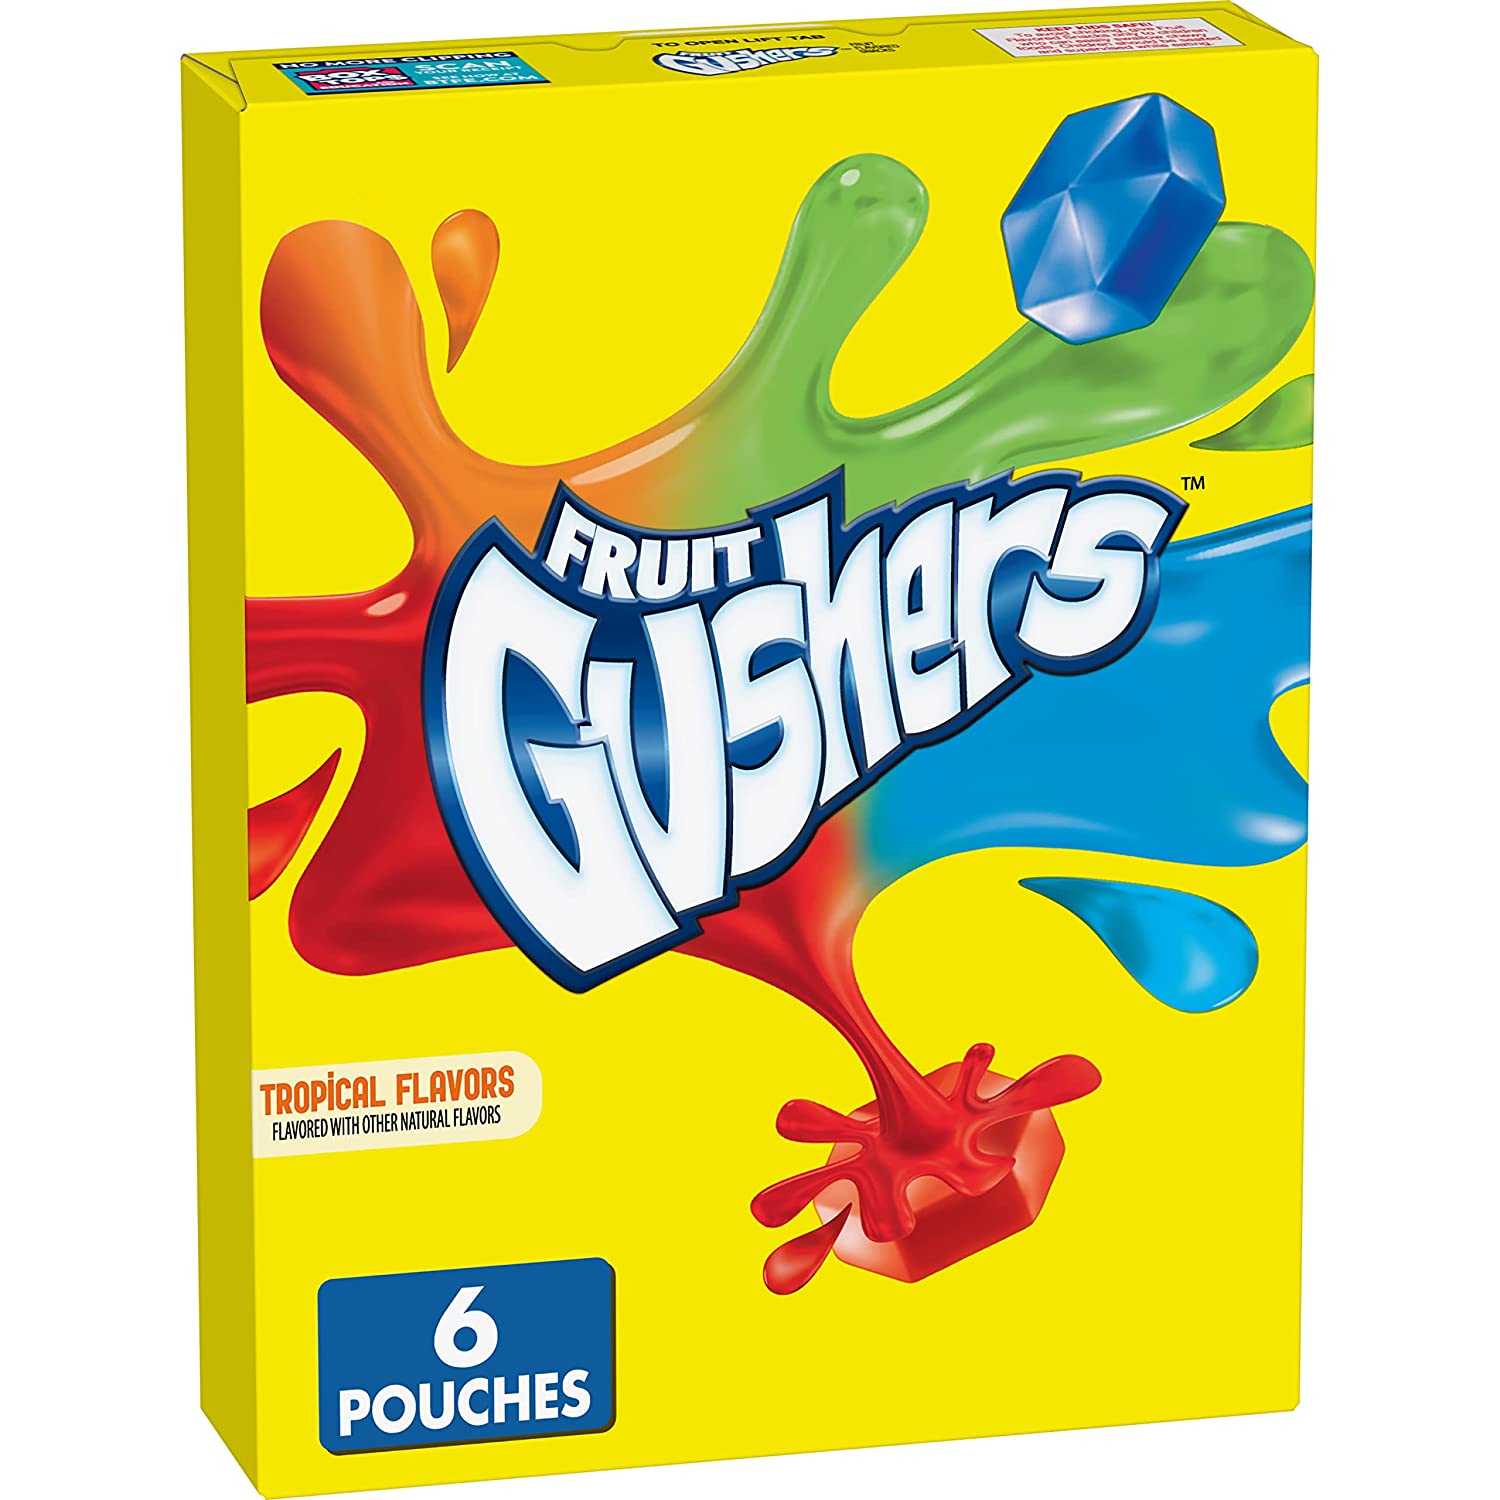 Gushers Fruit Flavored Snacks, Tropical, Gluten Free, 0.8 oz, 6 ct - $2.55 Amazon